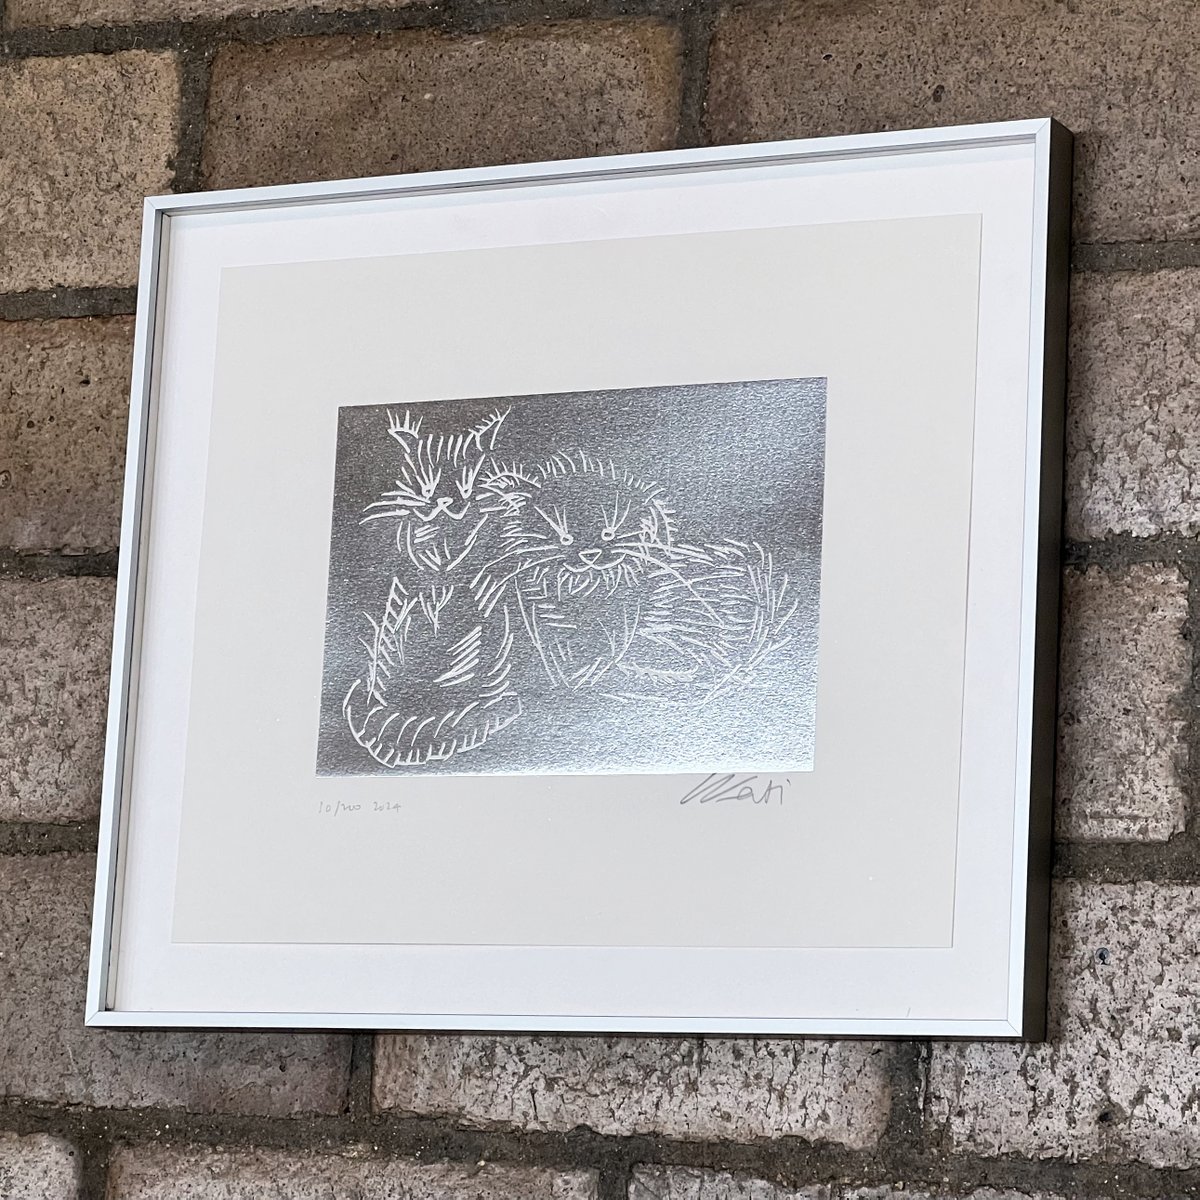 NEW: ‘Cats’ (silver), 2024 by Ai Weiwei 🐱 We are delighted to share a new limited edition print by @aiww exclusive to Kettle’s Yard. Purchase the print: shop.kettlesyard.co.uk